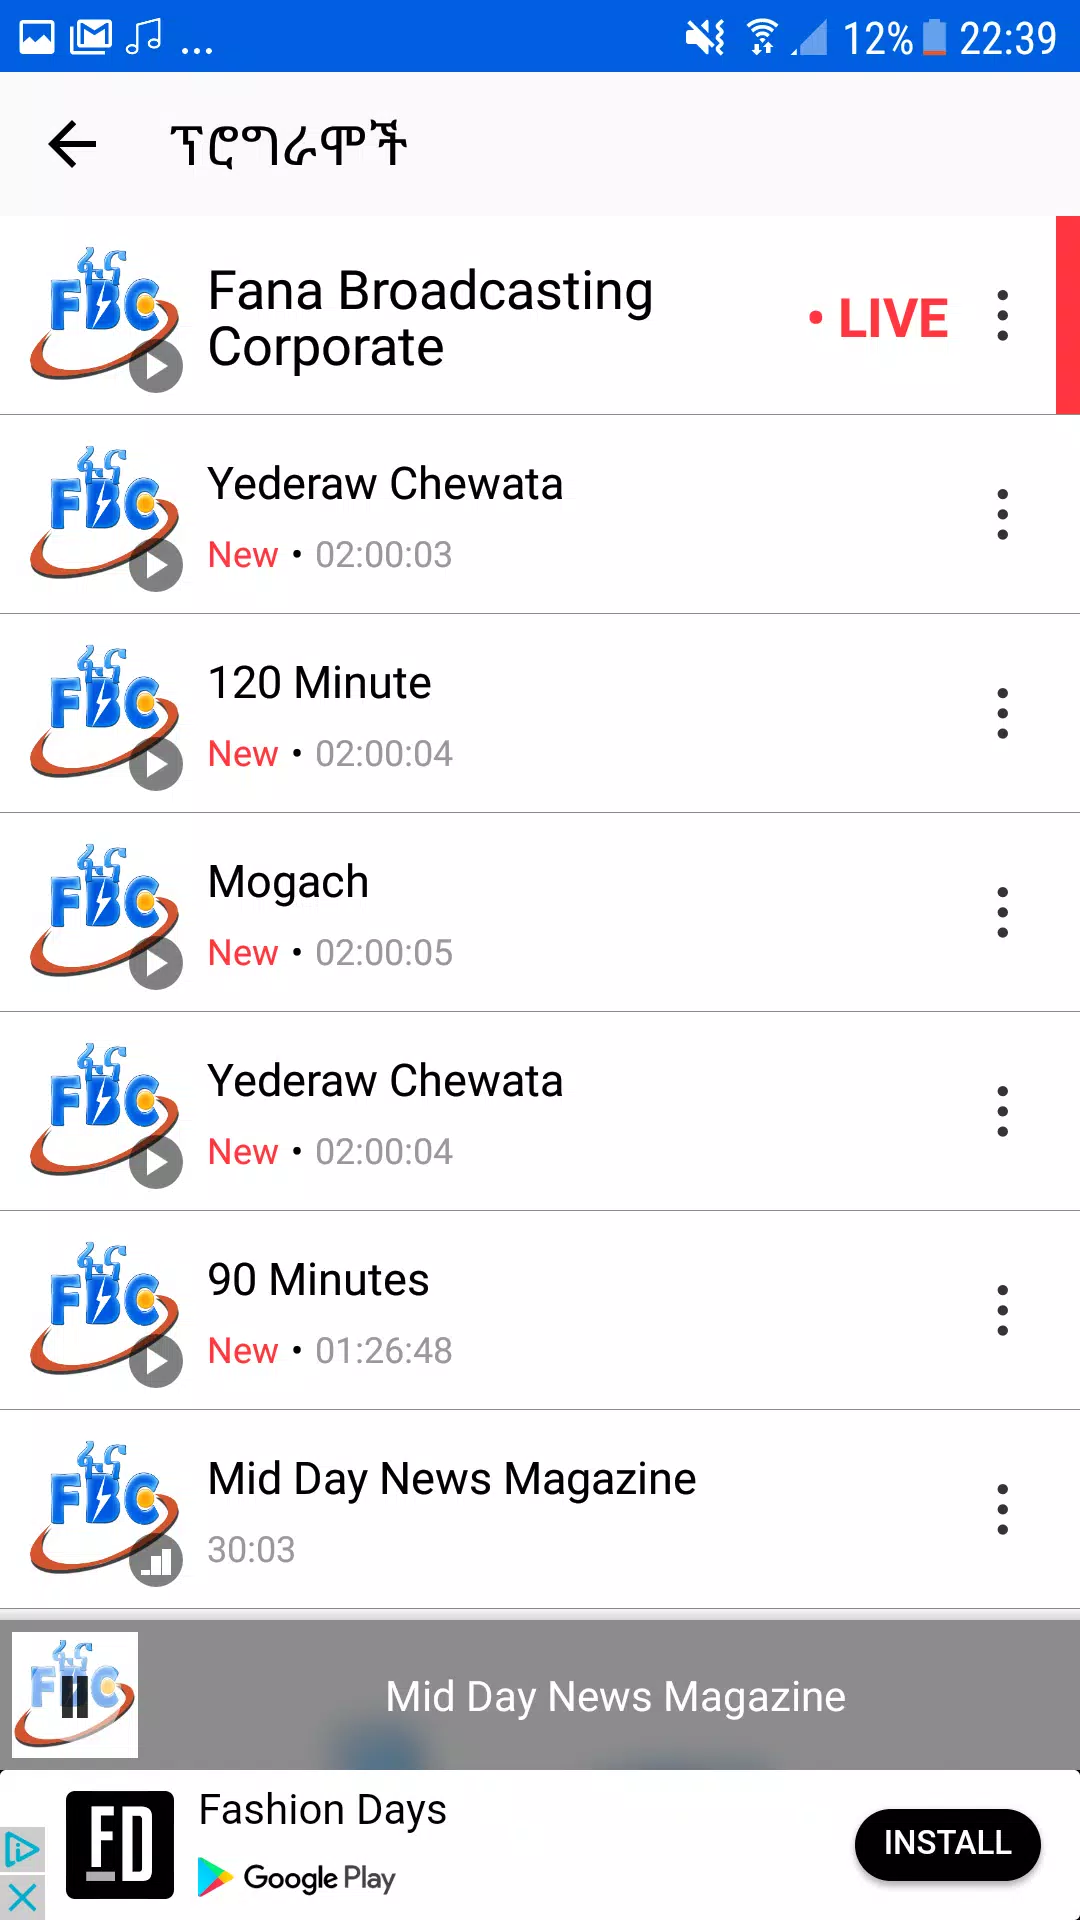 Fana Broadcasting Corporate for Android - APK Download